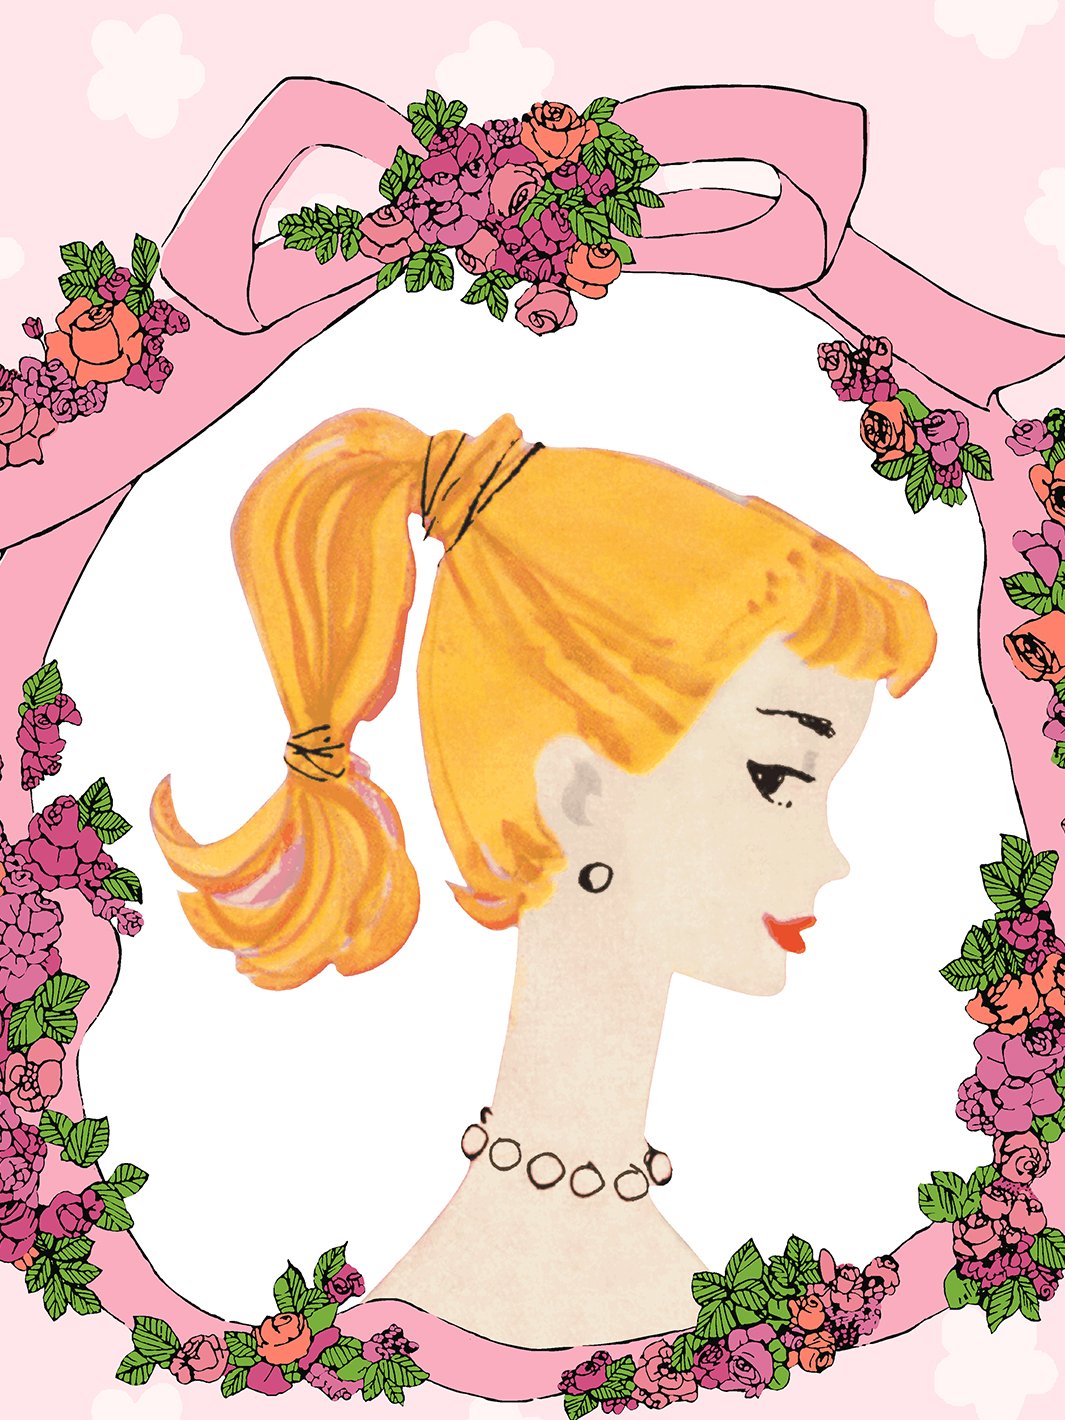 'Barbie Cameo' Wallpaper by Barbie™ - Pink